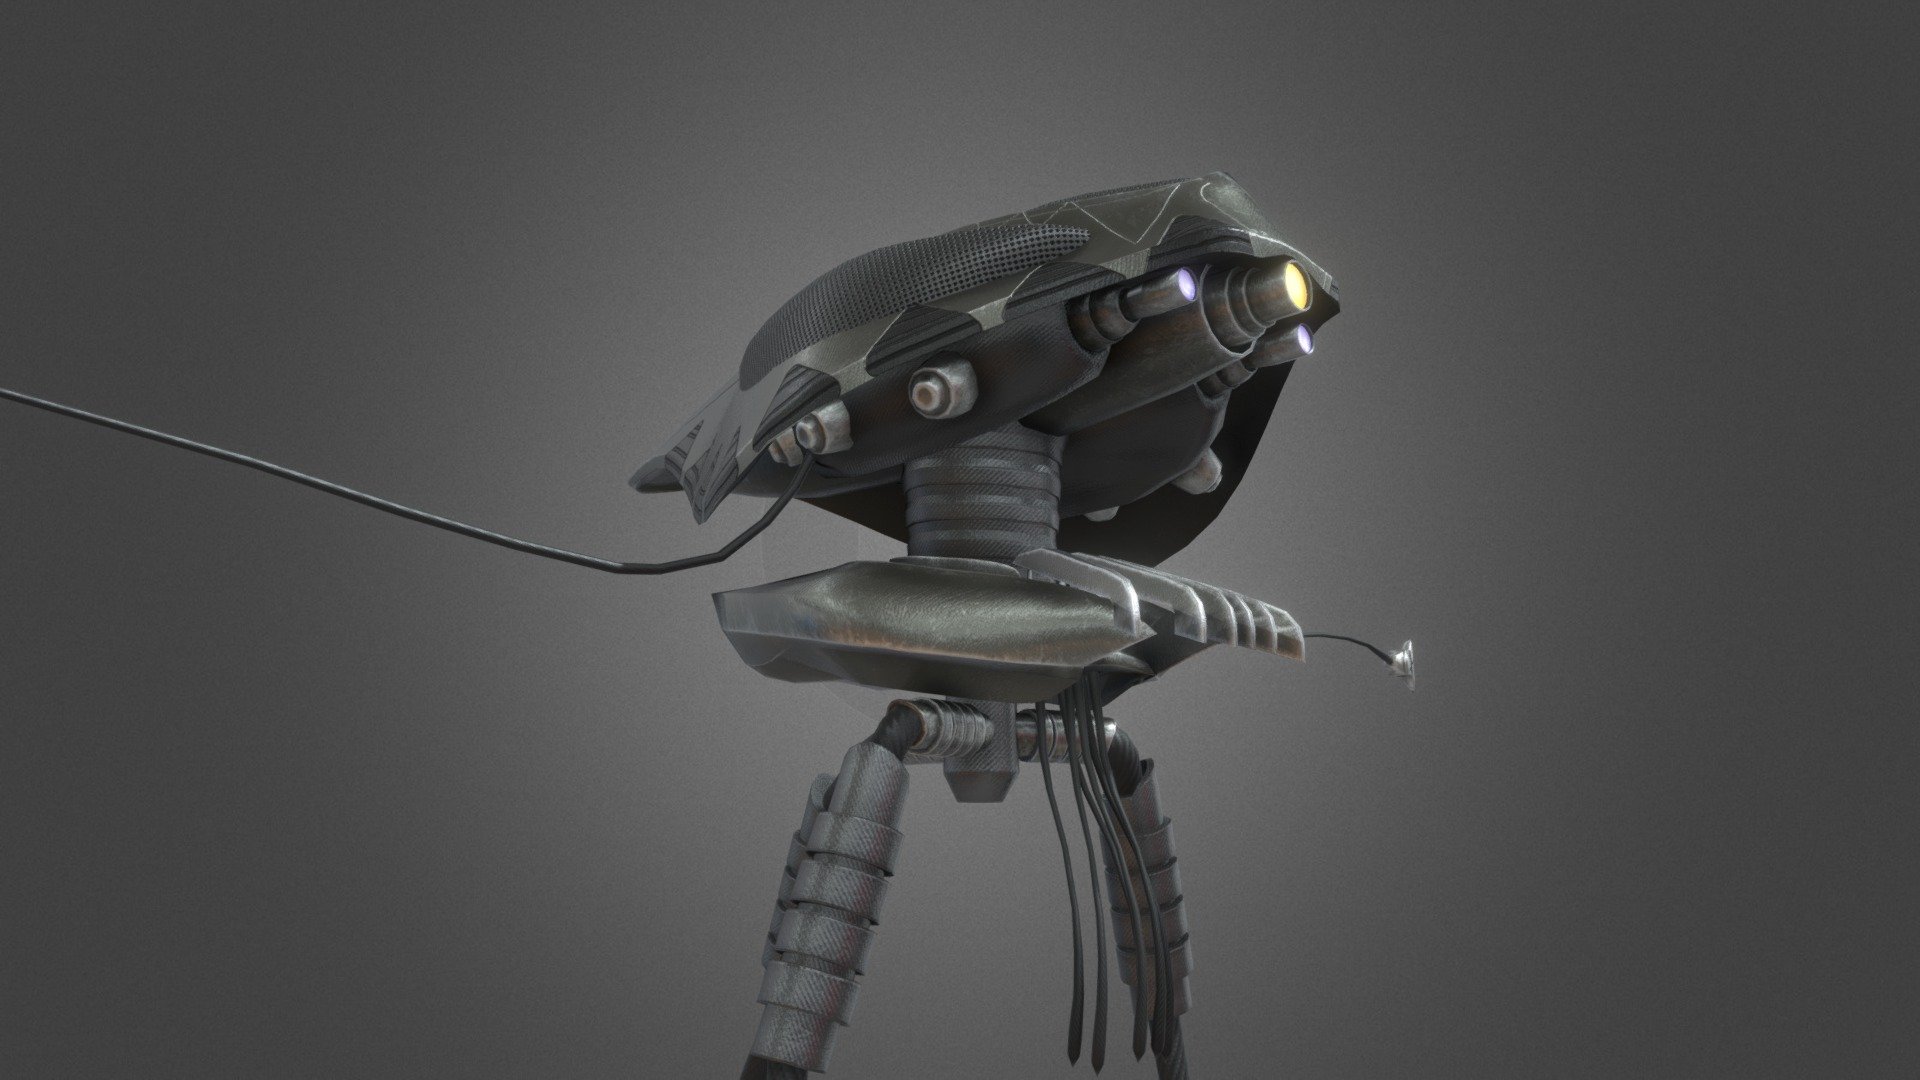 This was a VRChat compatible avatar commissioned by a Private Client.

Based on the Tripod from the 2000s War of the Worlds with Tom Cruise. The rigging was quite tricky as I had to hide a humanoid skeleton inside the body to get the arms to work properly.  Quite pleased with the results.  The legs have a custom animation as well to give proper locomotion.

Thanks so much to AORV and their fantastic reference.  Check out their Tripod as well! https://skfb.ly/U6qw - Ware of the Worlds Tripod - VRC Avatar - 3D model by samdutter 3d model